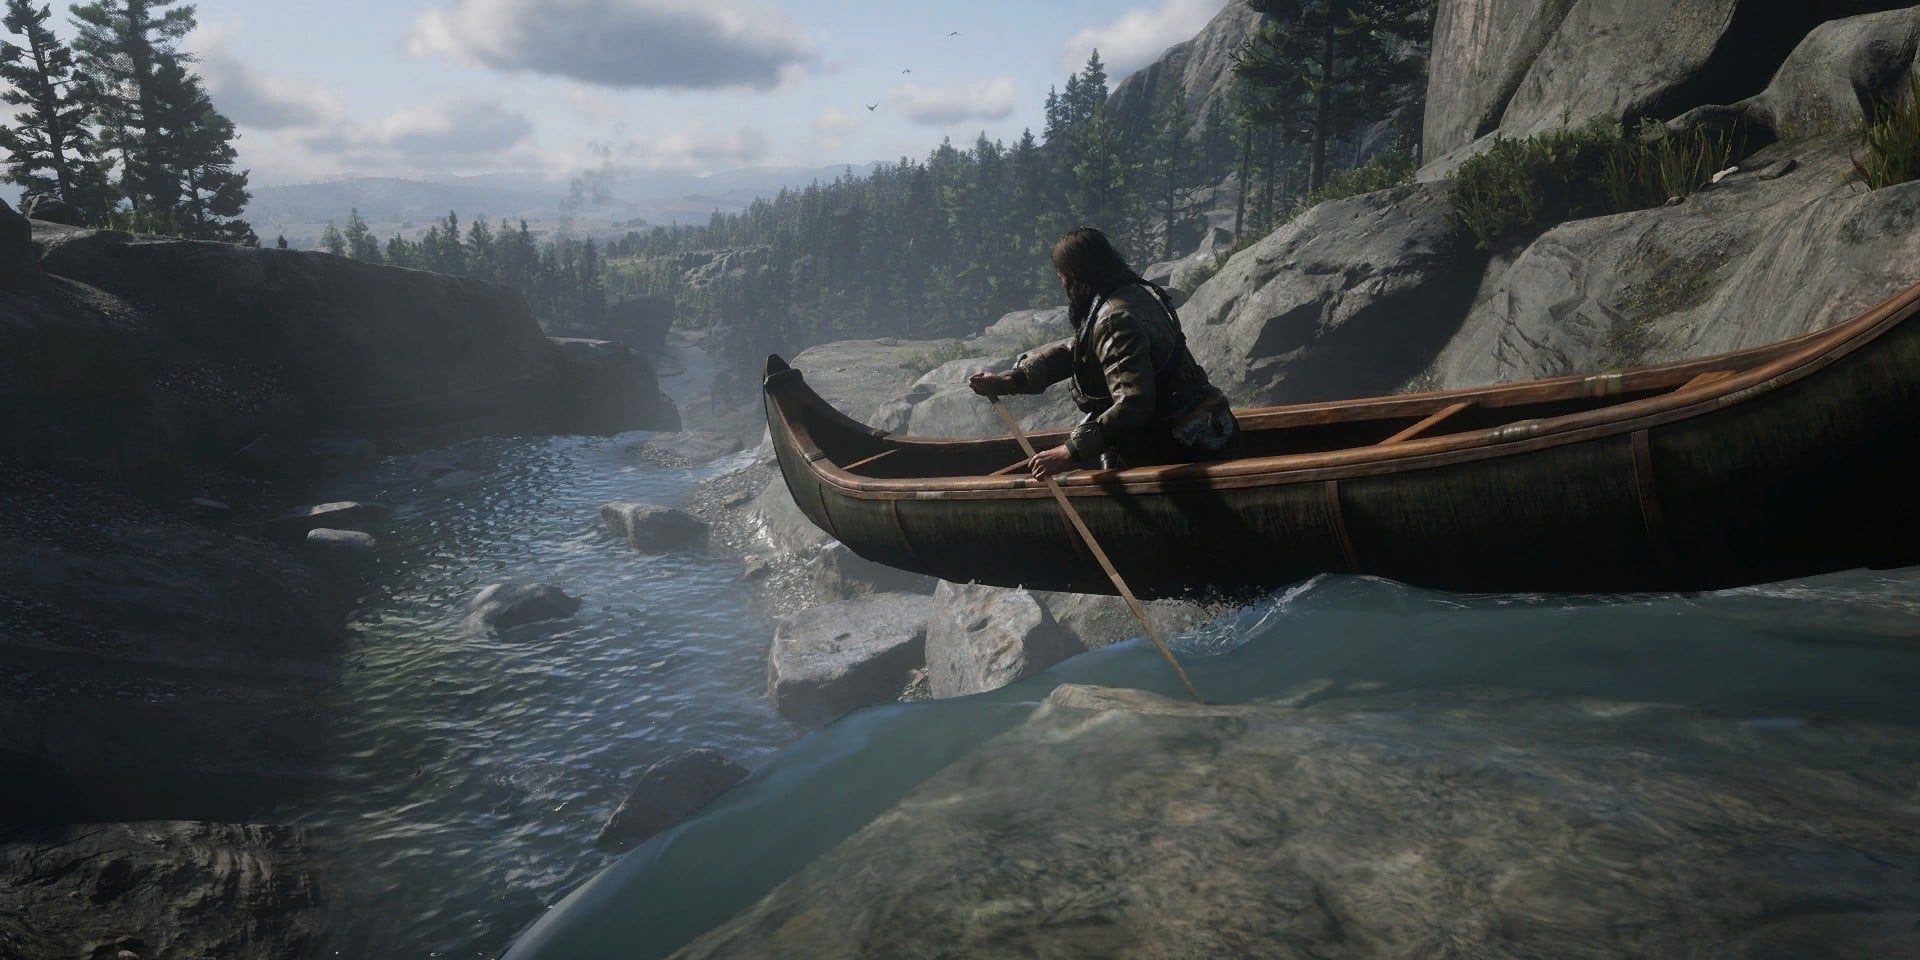 A player character rides a canoe down rocky rapids in a screenshot from Red Dead Redemption 2.